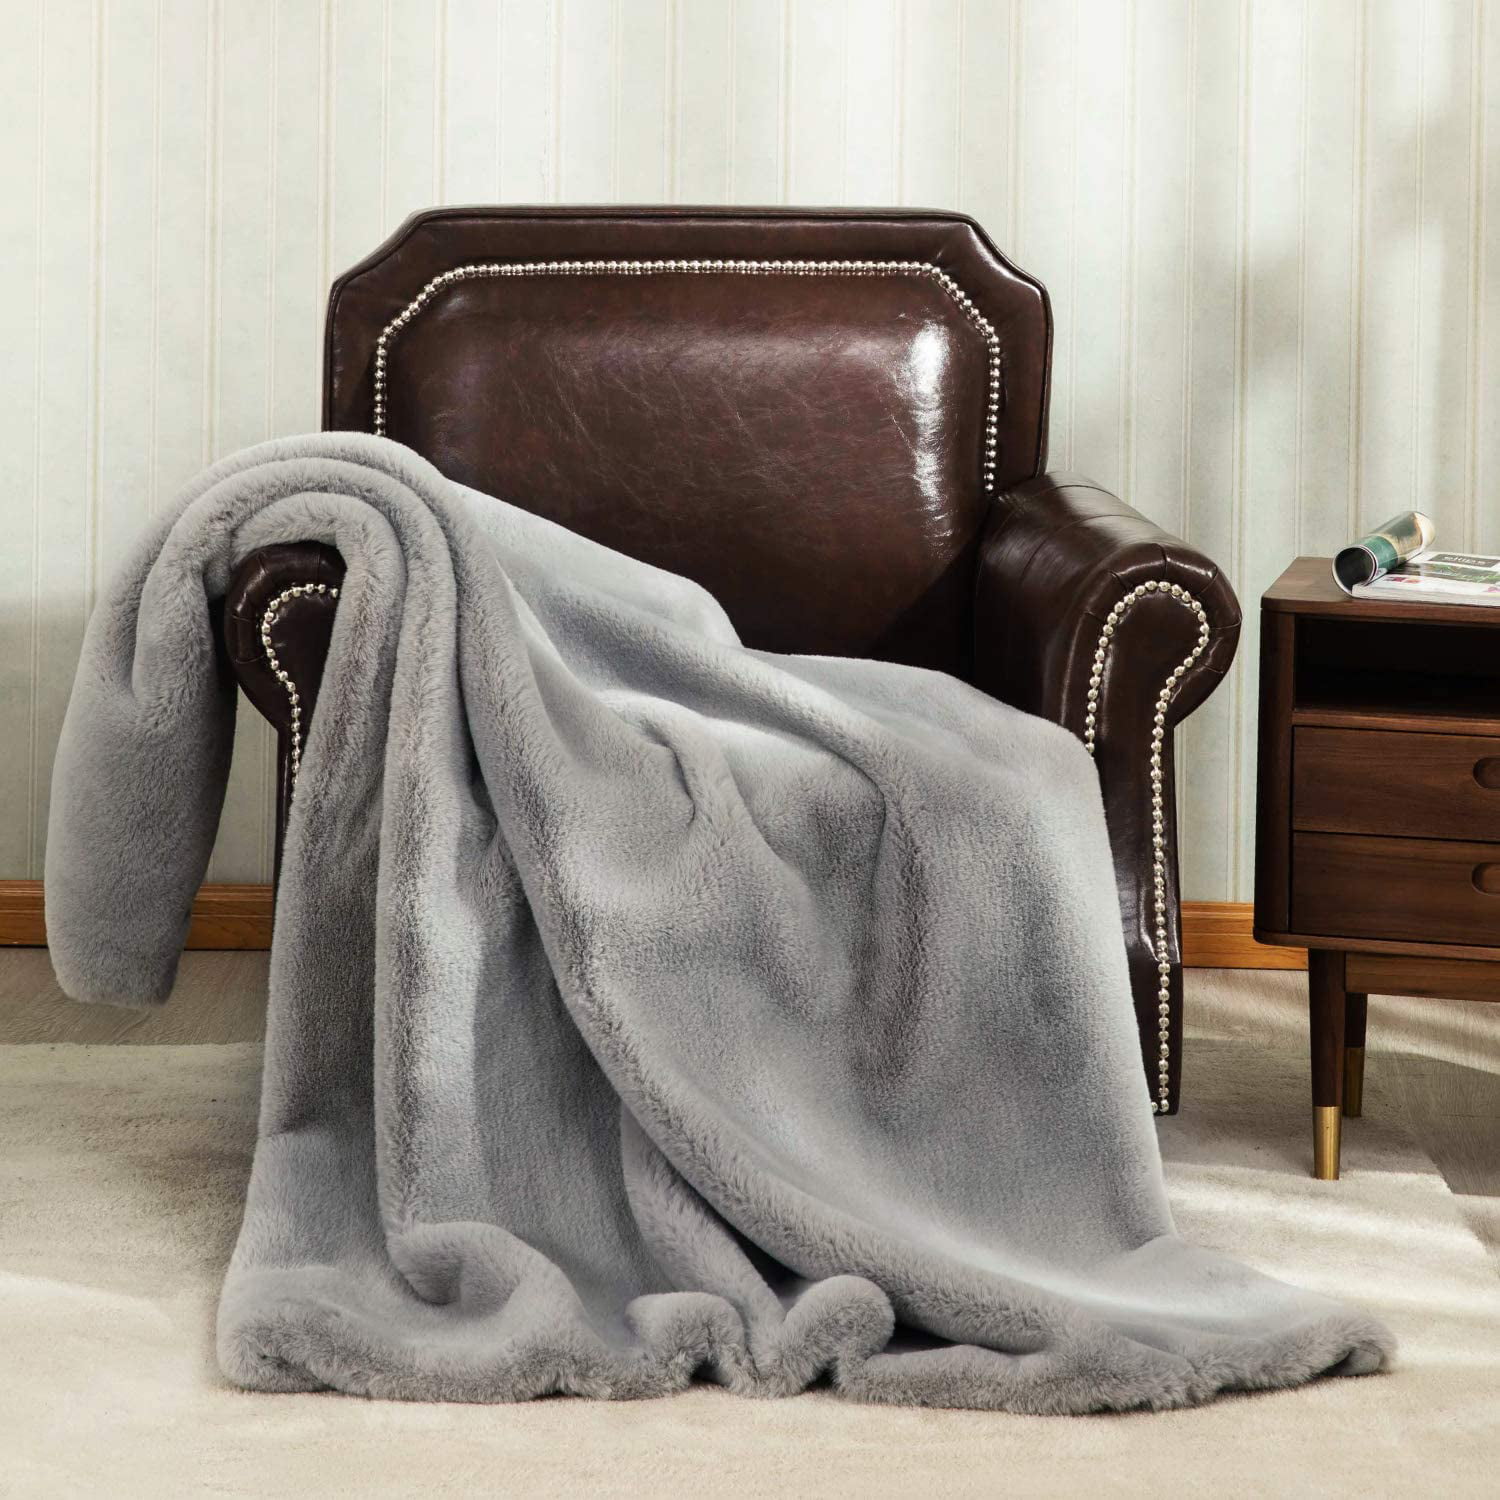 Wellbeing Faux Fur Throw Blanket for Couch Fall Throw Blankets,Soft Reversible Brown Fuzzy Blanket for Bed,Sofa,Chair50 x 60